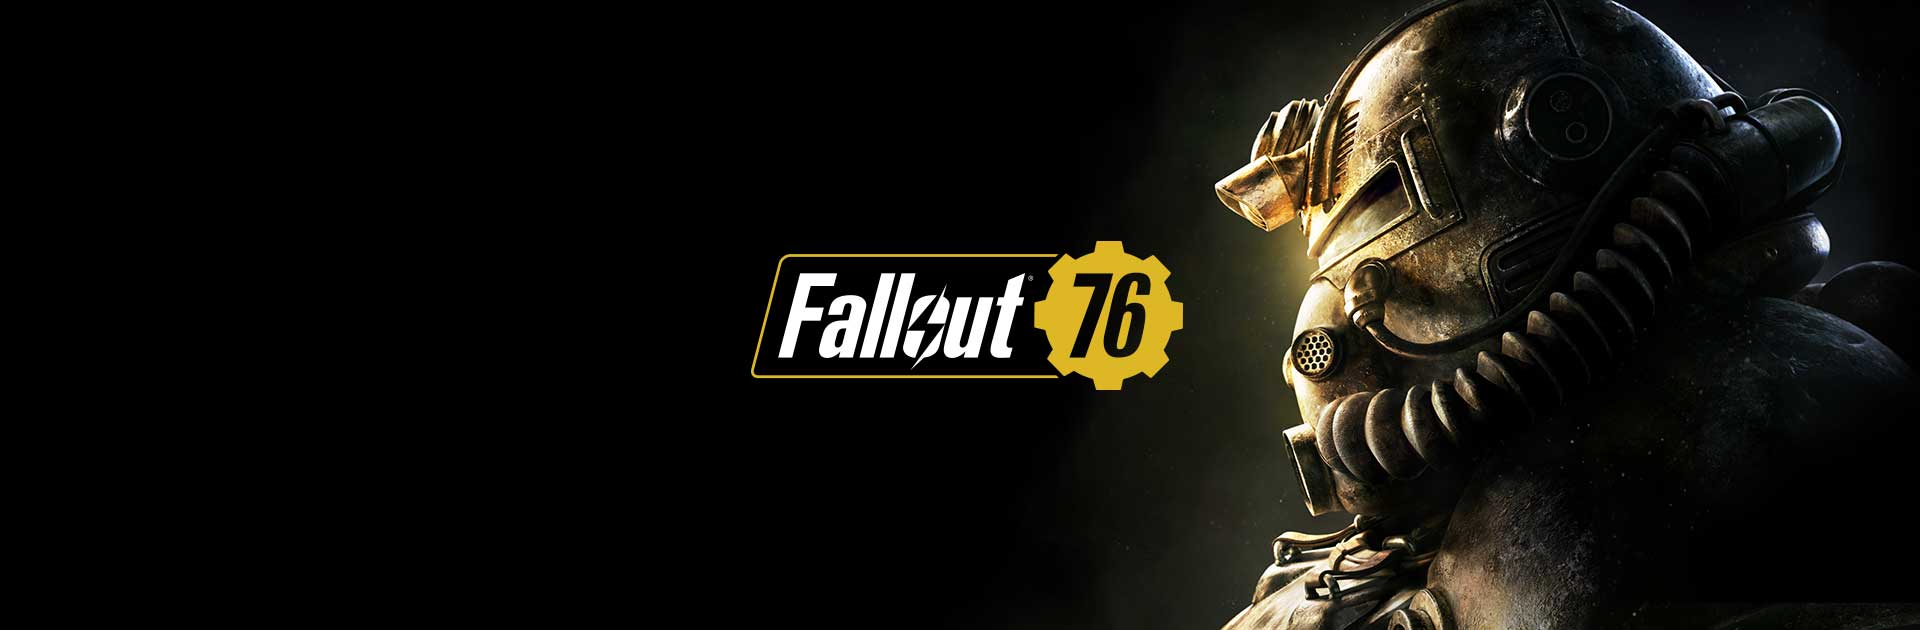 Is Fallout 76 worth playing both as single player and multiplayer? Early review